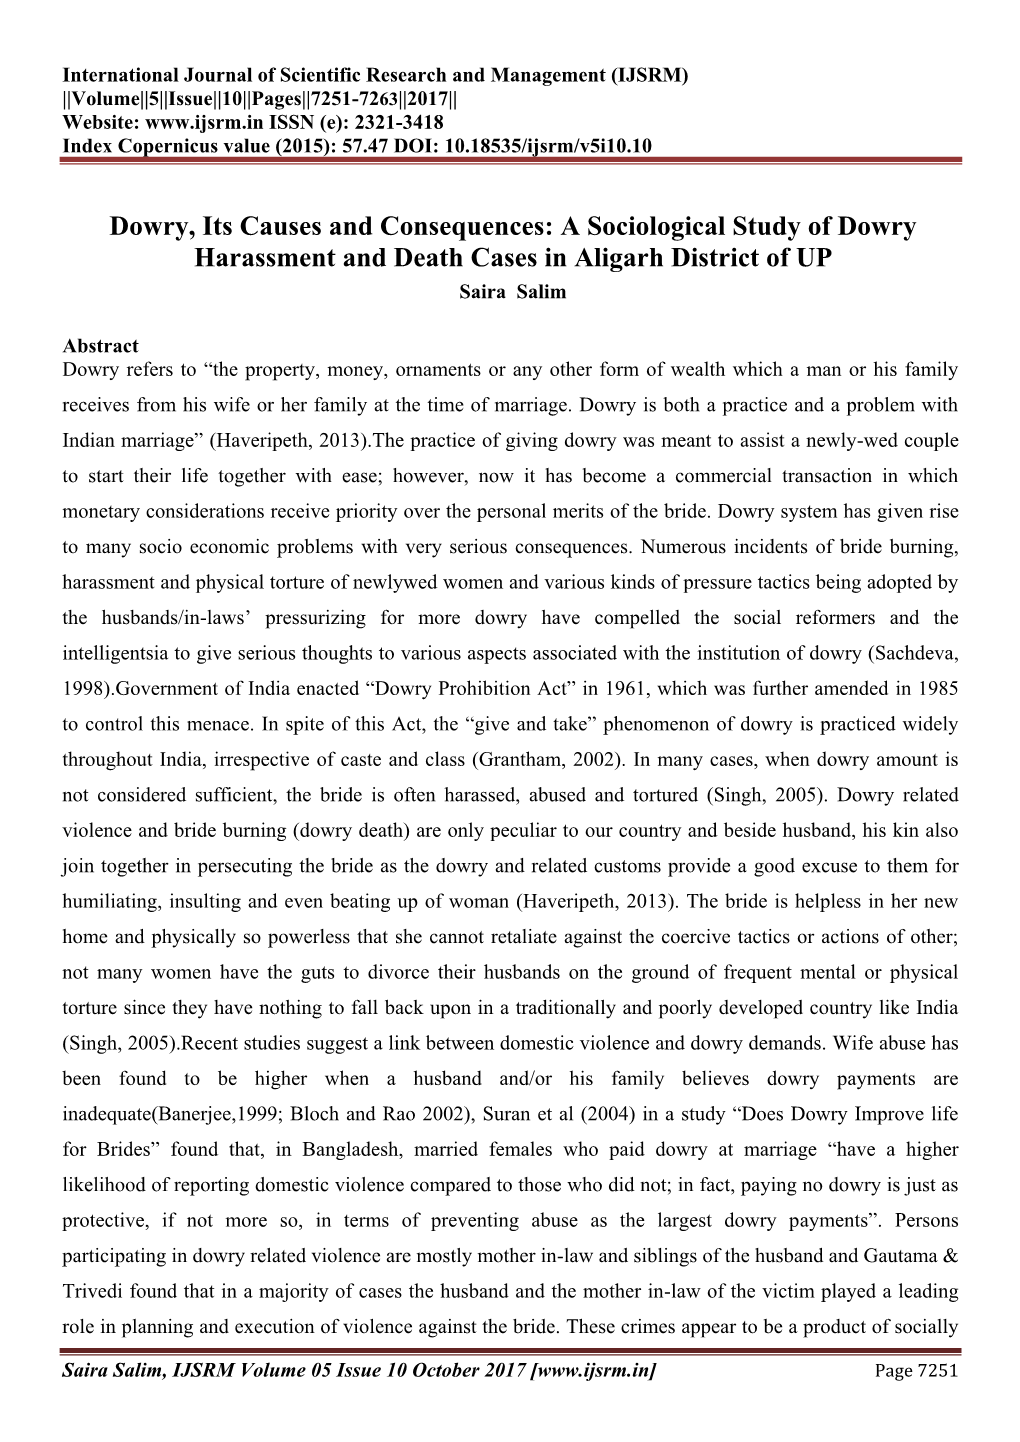 A Sociological Study of Dowry Harassment and Death Cases in Aligarh District of up Saira Salim